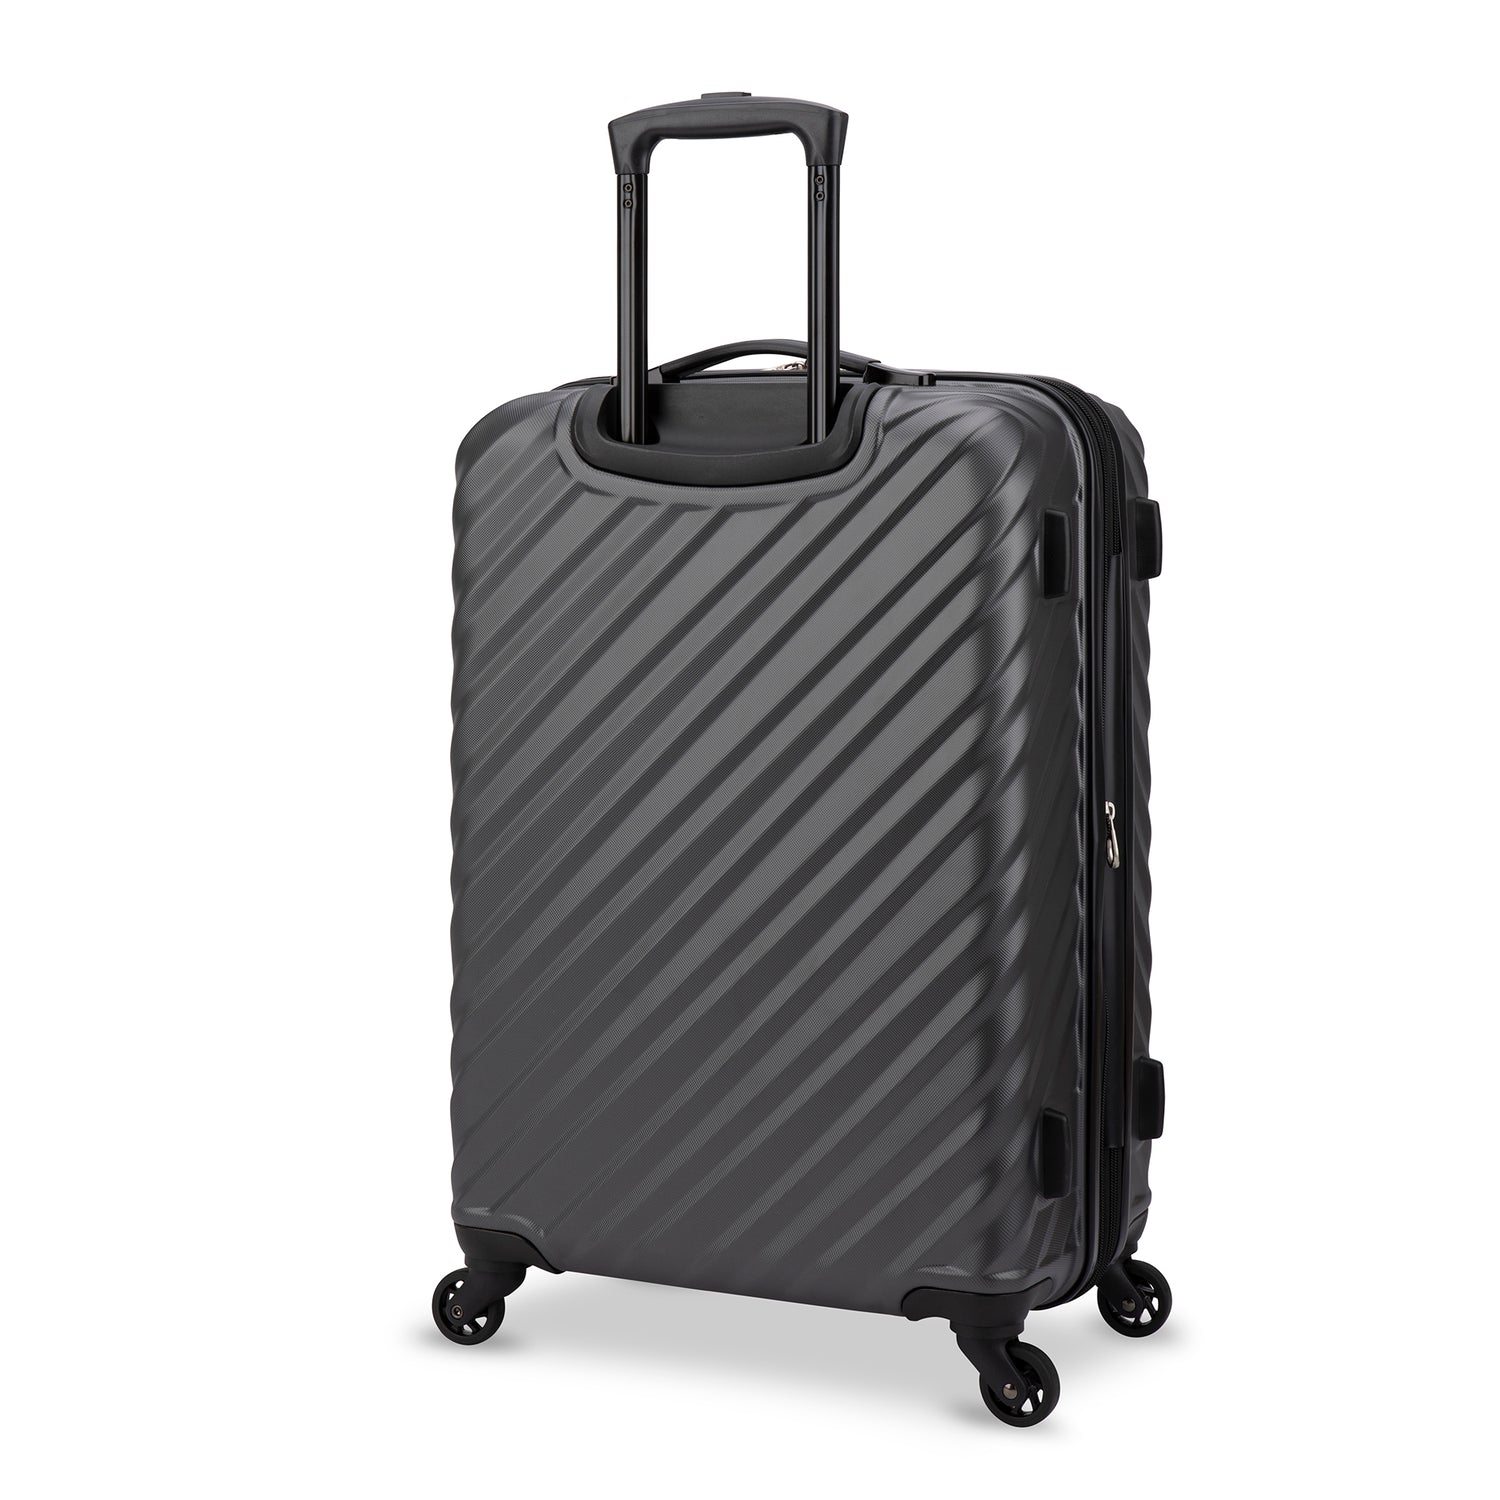 Back side view of a black hard side luggage called MOD designed by Swiss Gear sold at Bentley, showcasing its telescopic handle and resistant-absorbant texture.